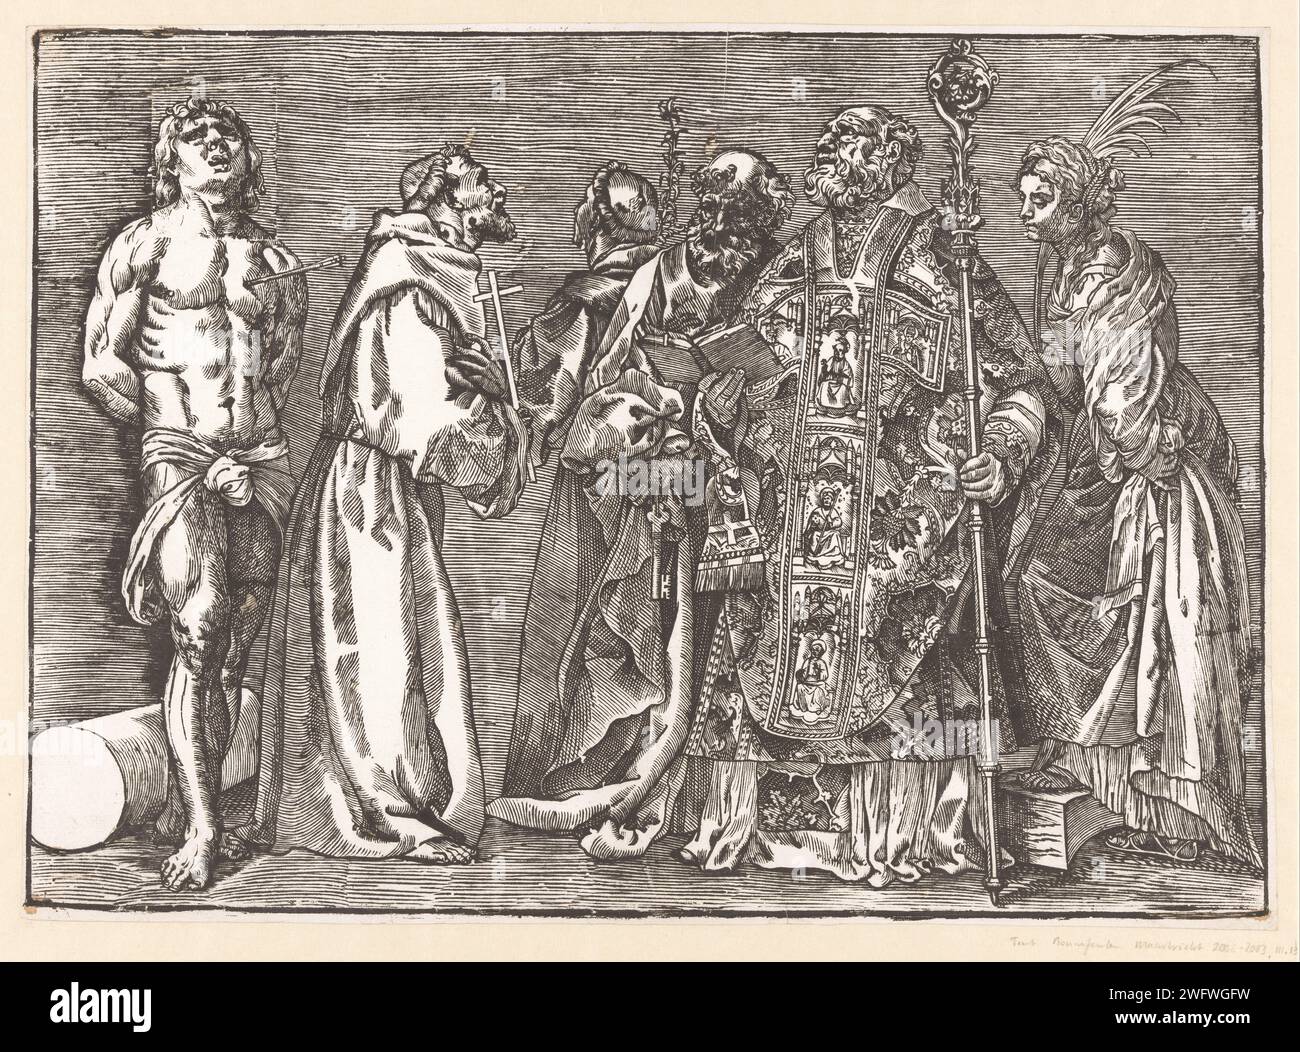 Six standing saints, Titian, Nicolò Boldrini (attributed to), c. 1535 print Six saints, standing next to each other: Sebastiaan with an arrow in his chest, Francis with cross, Antonius with lily, Peter with key, Nicolaas of Myra with book and cromp and Catharina with a piece of the wheel and a palm branch of martyrdom. print maker: VeniceItaly paper  the virgin martyr Catherine of Alexandria; possible attributes: book, crown, emperor Maxentius, palm-branch, ring, sword, wheel. the bishop Nicholas of Myra (or Bari); possible attributes: anchor, boat, three golden balls (on a book), three purses Stock Photo